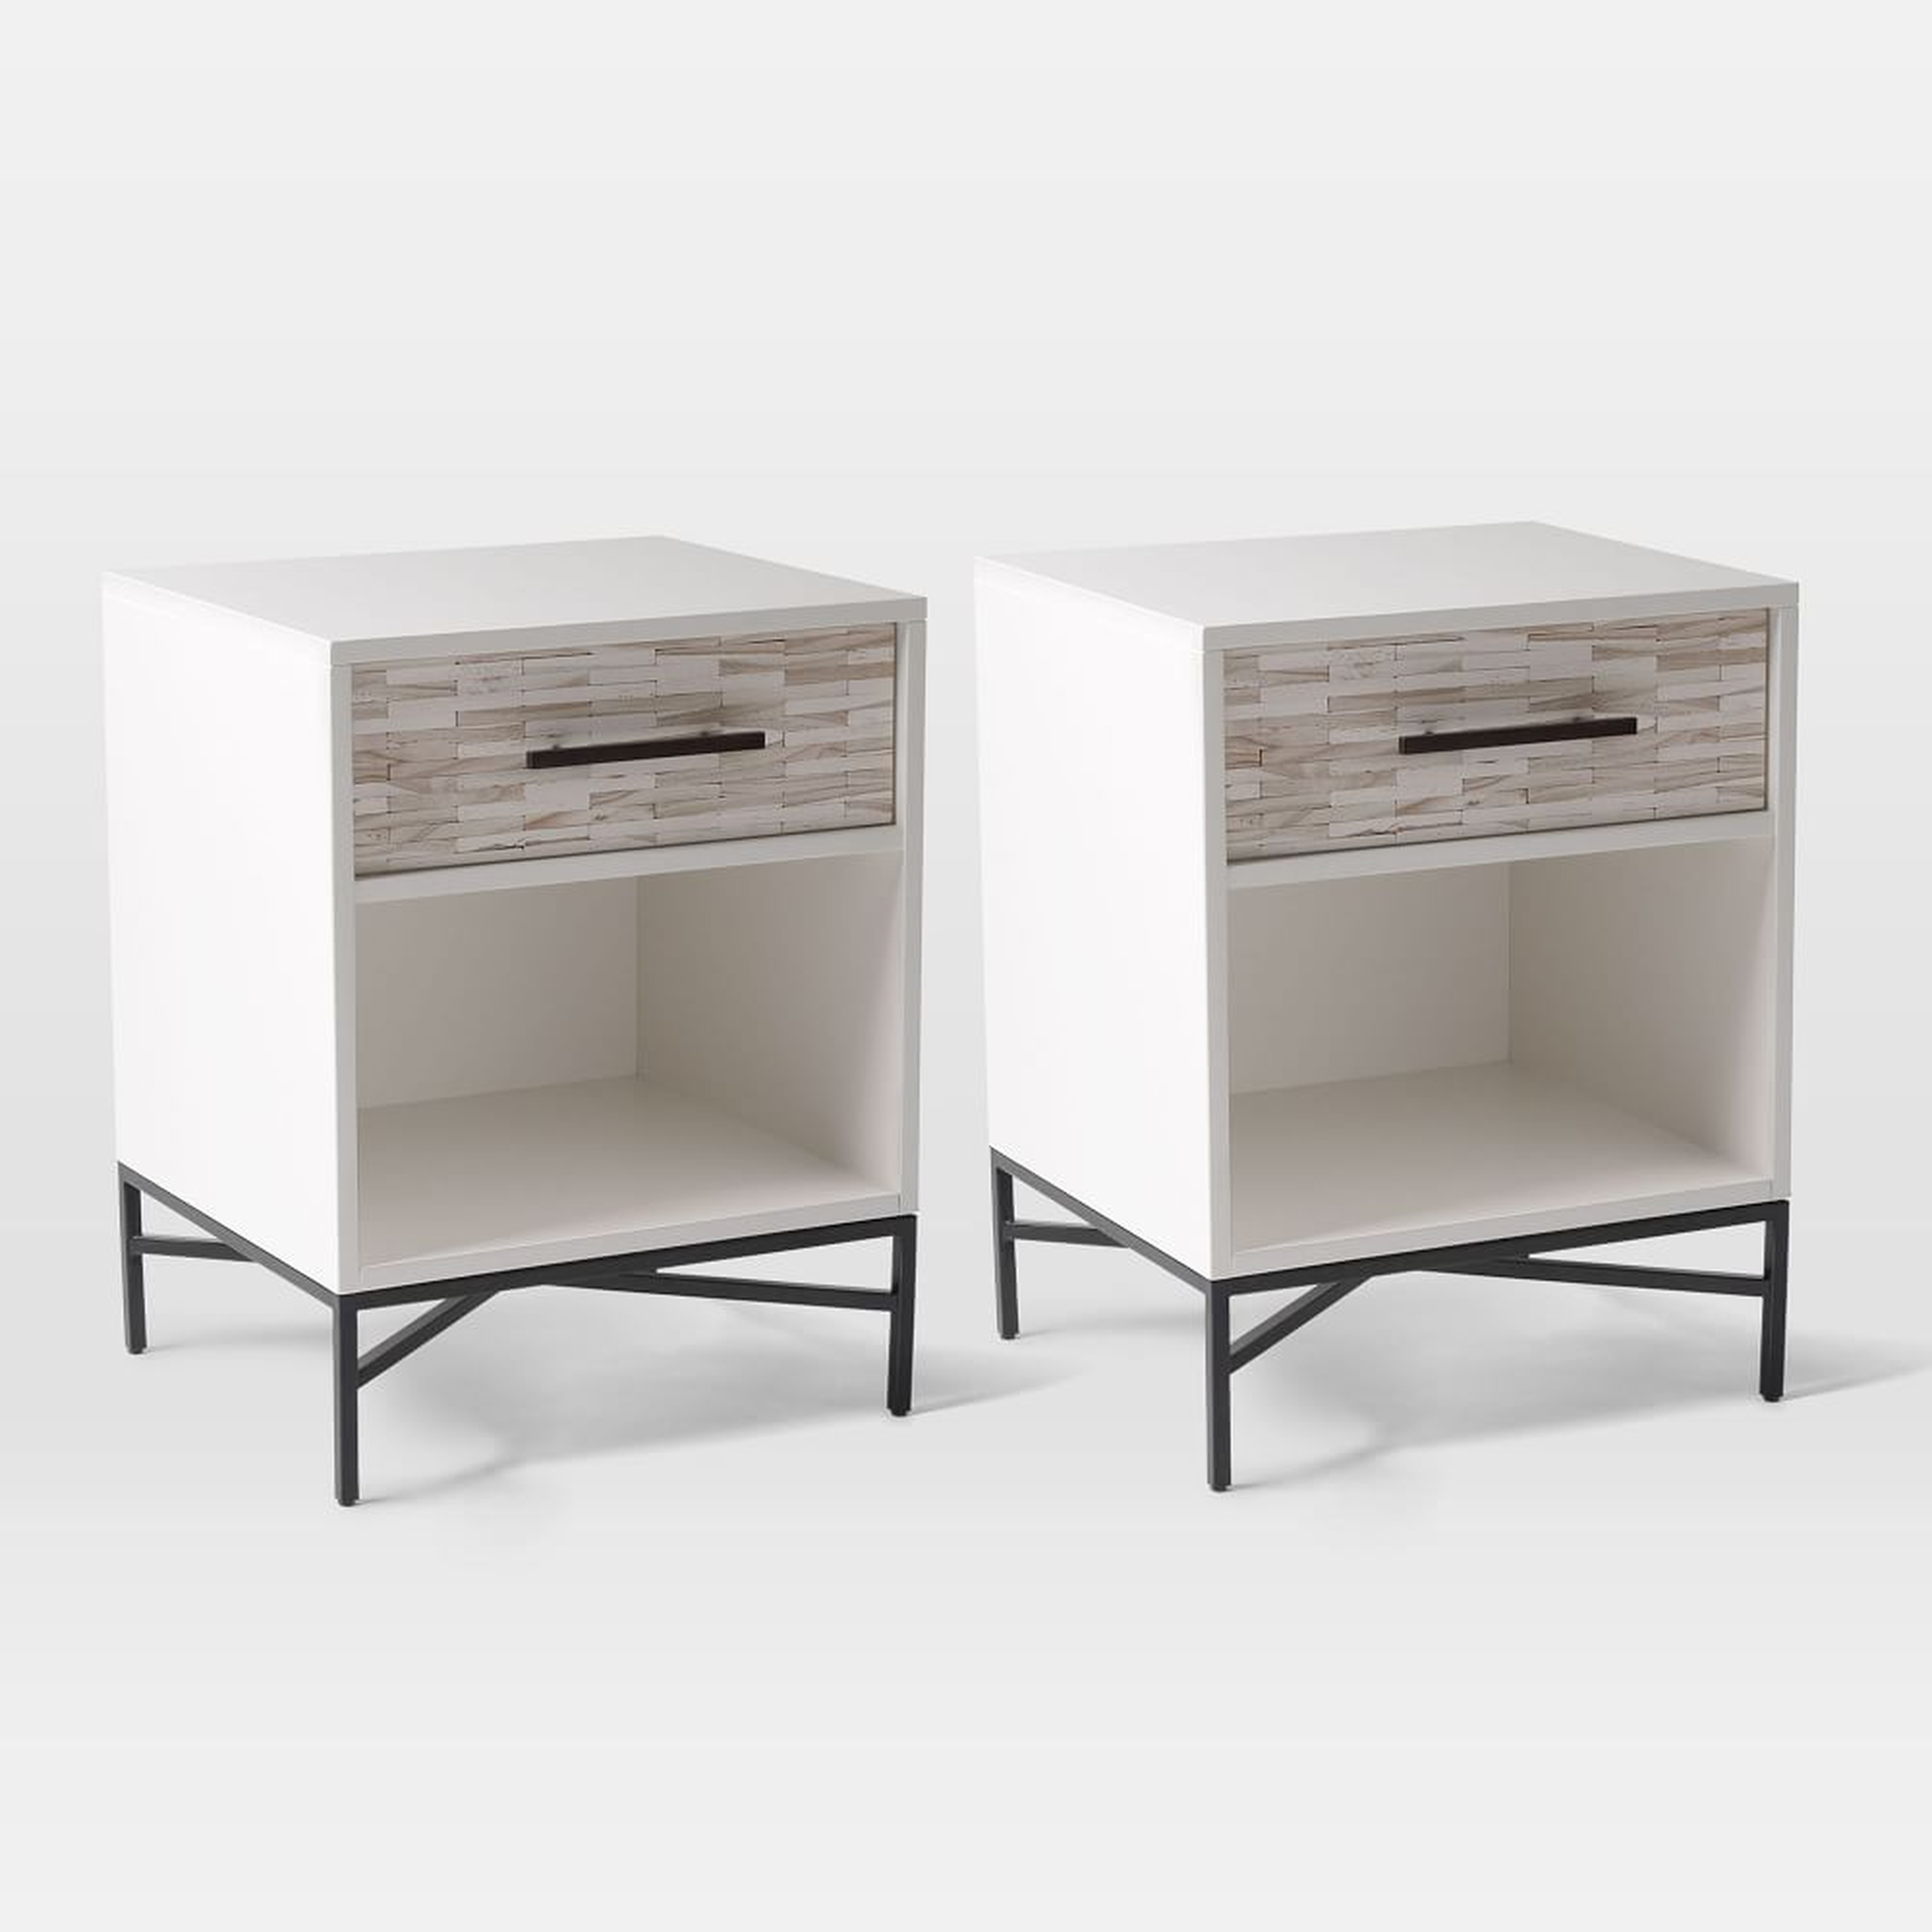 Tiled Nightstand, White, Set of 2 - West Elm